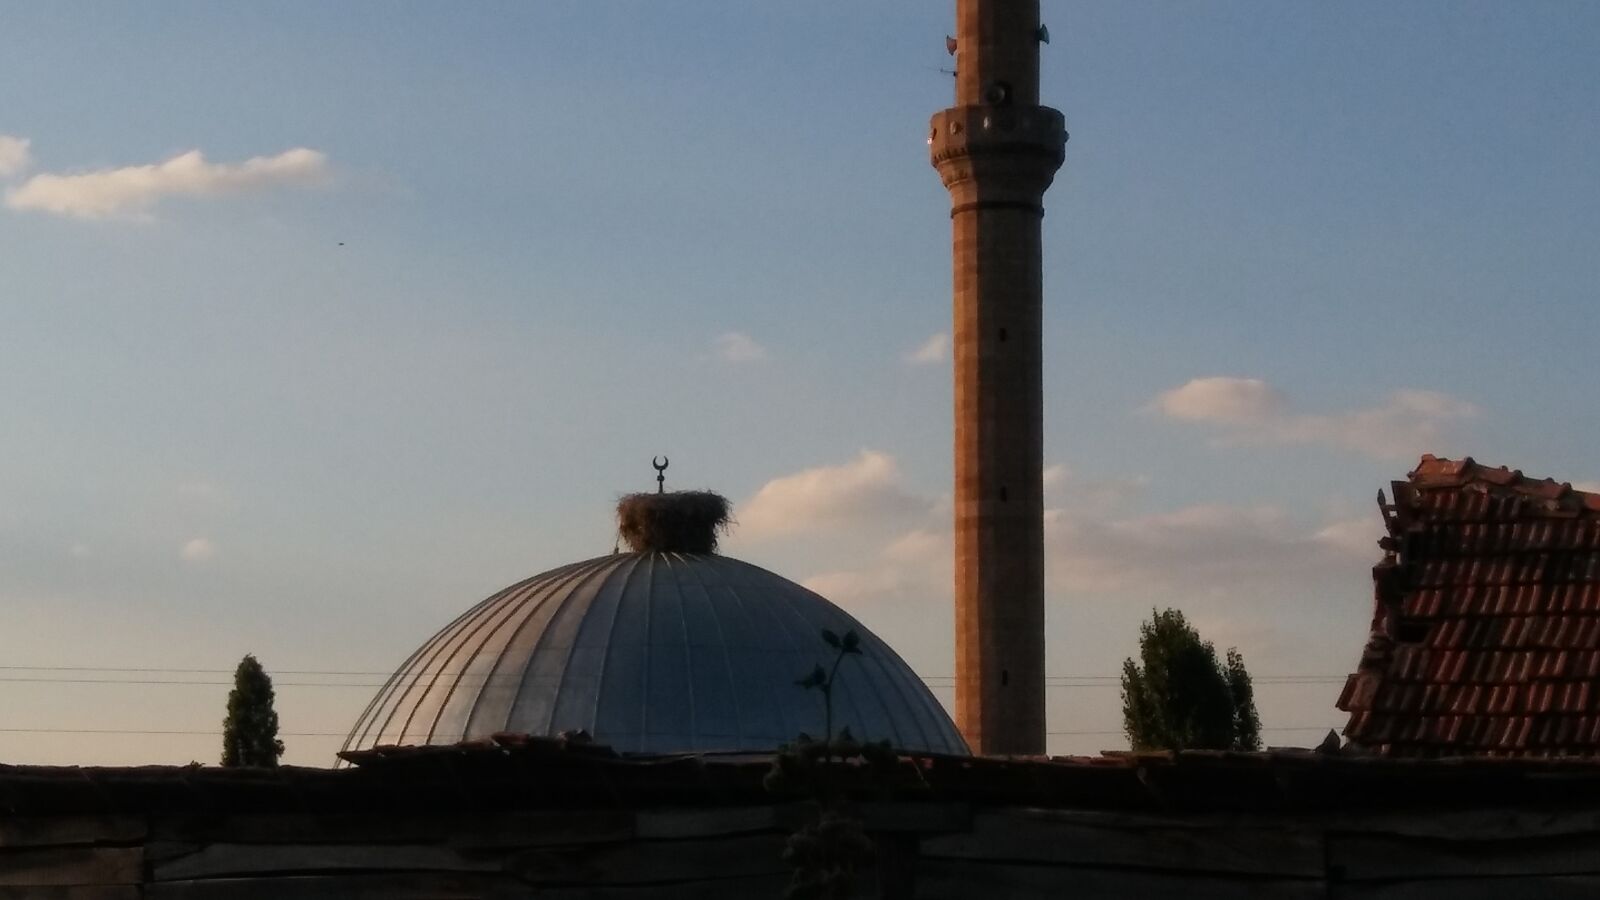 LG K520 sample photo. Stork, mosque, dome photography